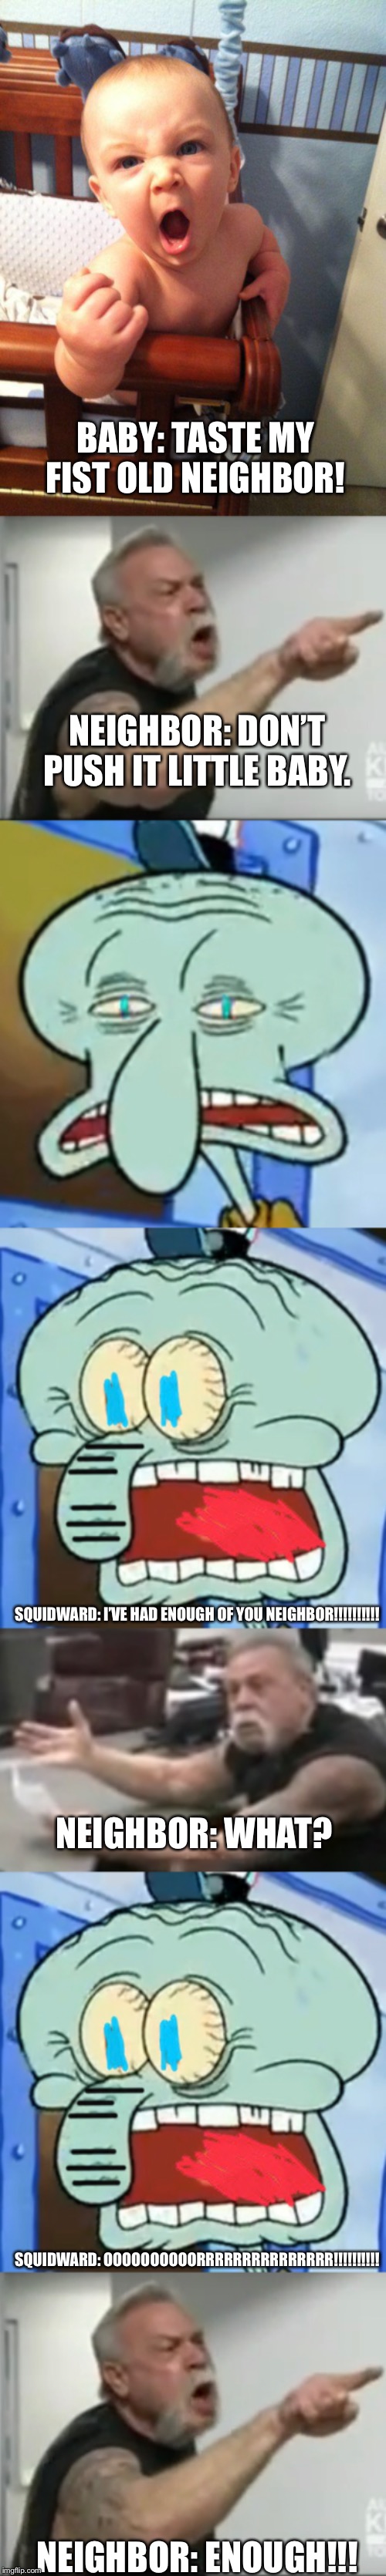 Neighbor: final part 2 | BABY: TASTE MY FIST OLD NEIGHBOR! NEIGHBOR: DON’T PUSH IT LITTLE BABY. SQUIDWARD: I’VE HAD ENOUGH OF YOU NEIGHBOR!!!!!!!!!! NEIGHBOR: WHAT? SQUIDWARD: OOOOOOOOOORRRRRRRRRRRRRRR!!!!!!!!!! NEIGHBOR: ENOUGH!!! | image tagged in angry baby | made w/ Imgflip meme maker